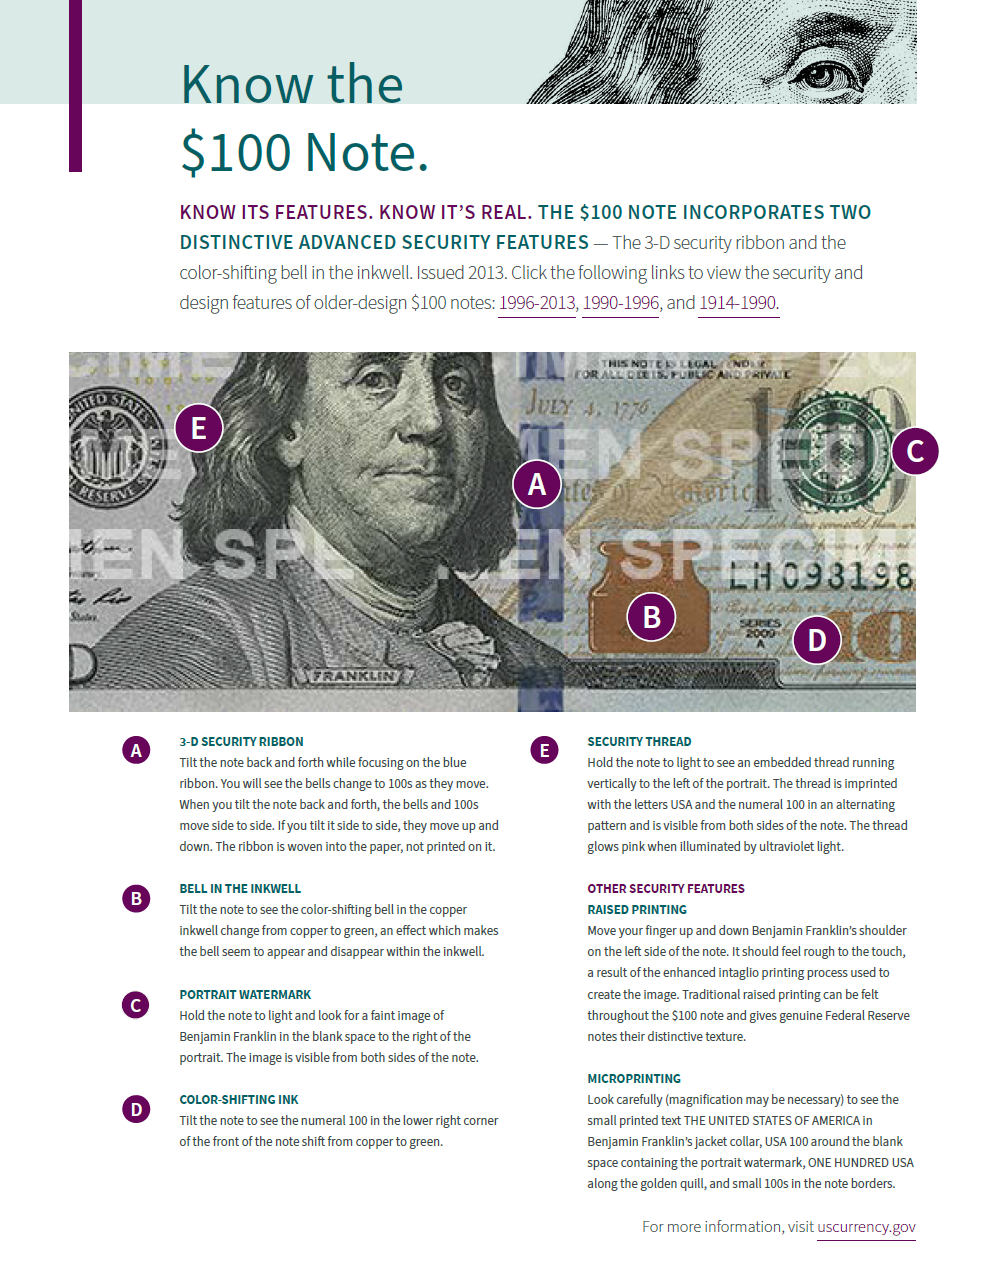 An image of the “Know the $100 Note” page in the Teller Toolkit detailing several security and design features of $100 Federal Reserve notes